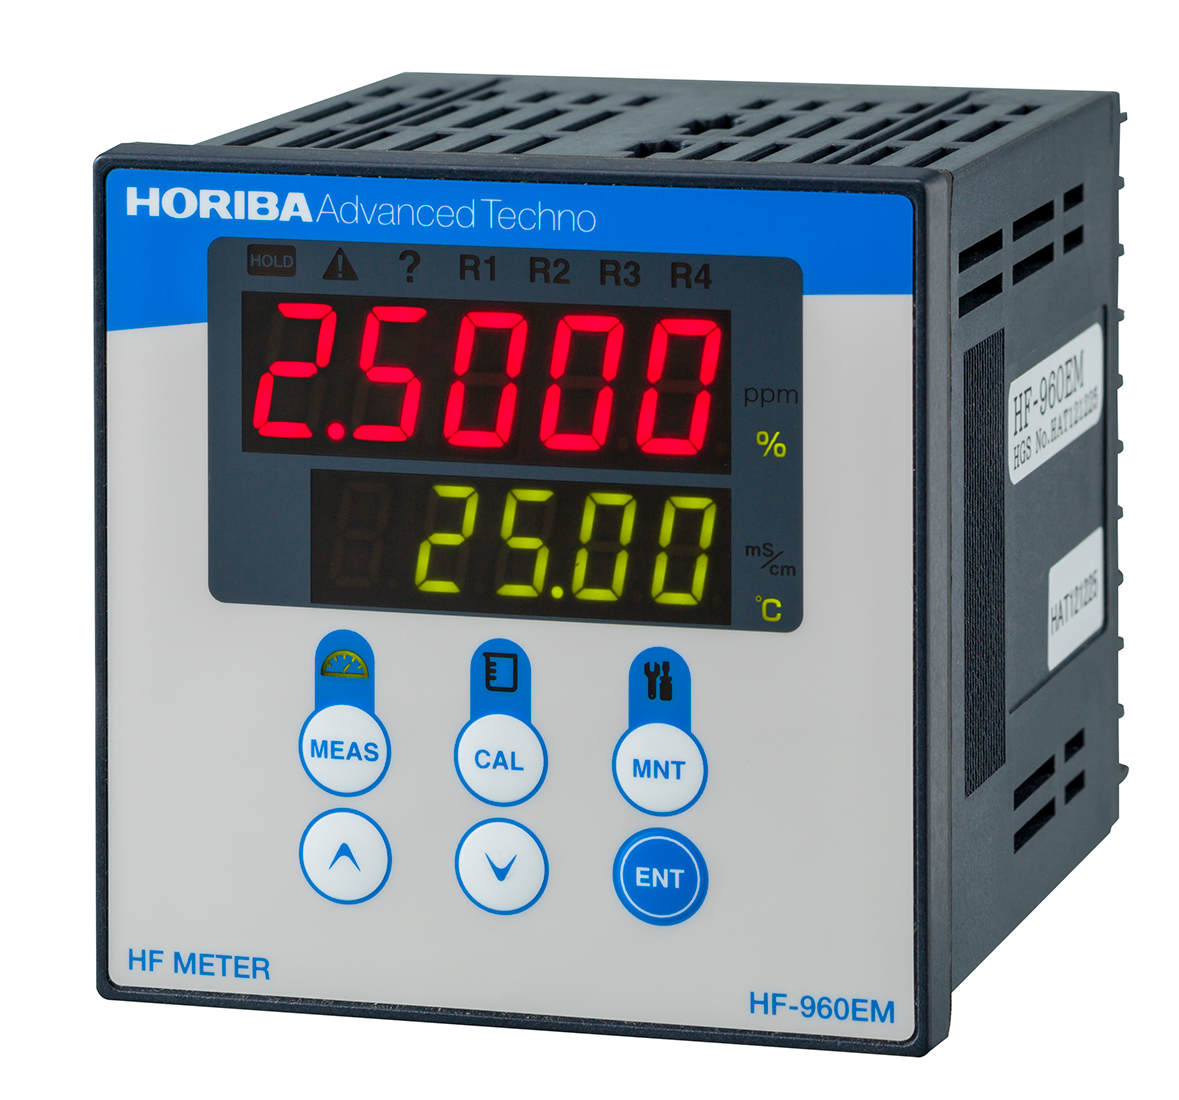 In-line Sensor & Auto Range Switching Concentration Monitor HF-960EM